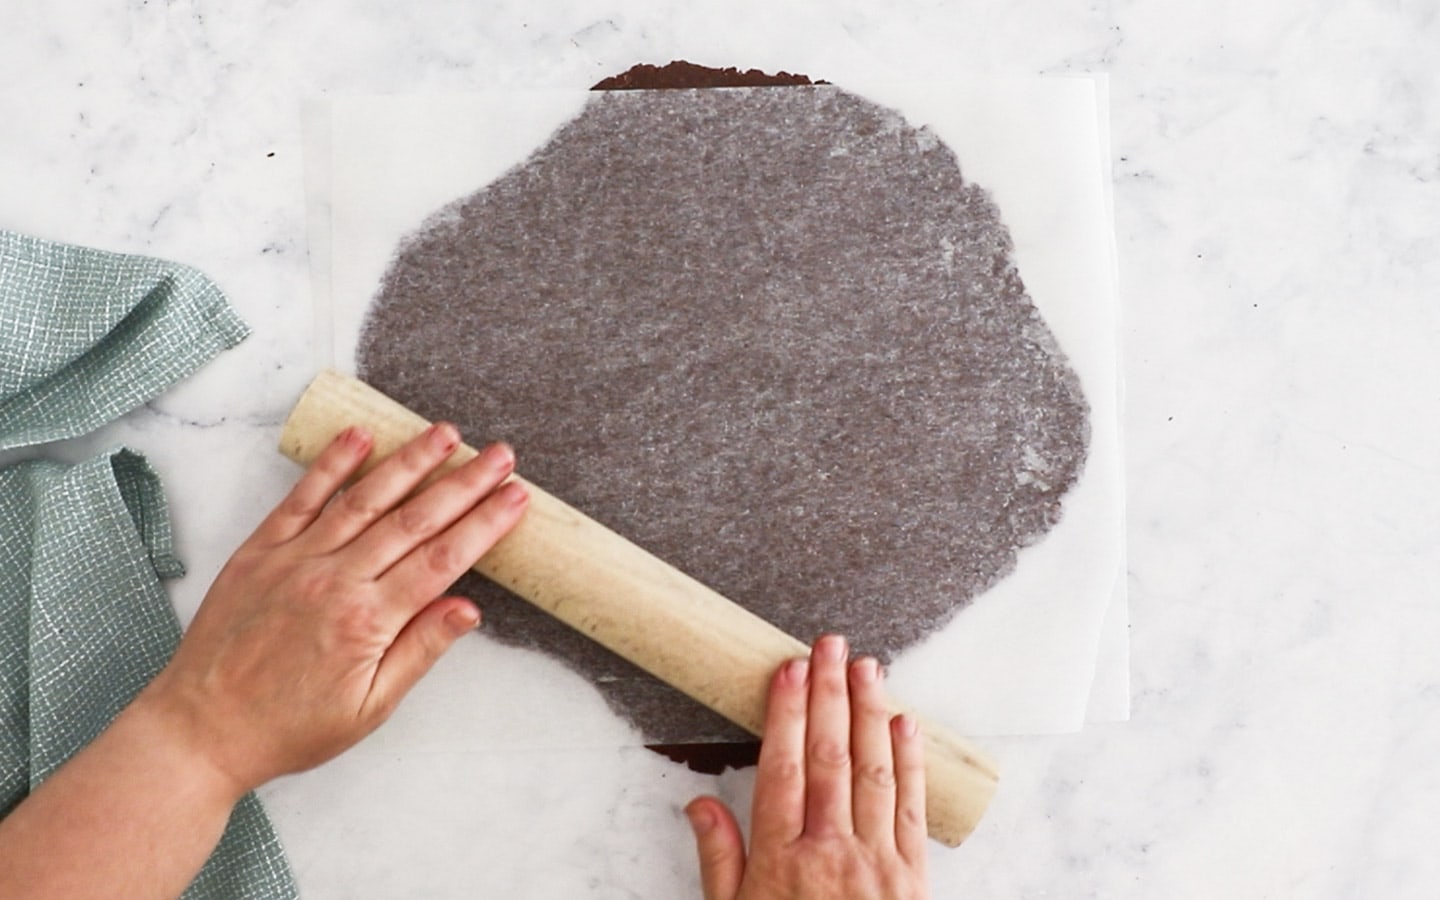 Rolling the chocolate pie dough out between two sheets of baking paper.